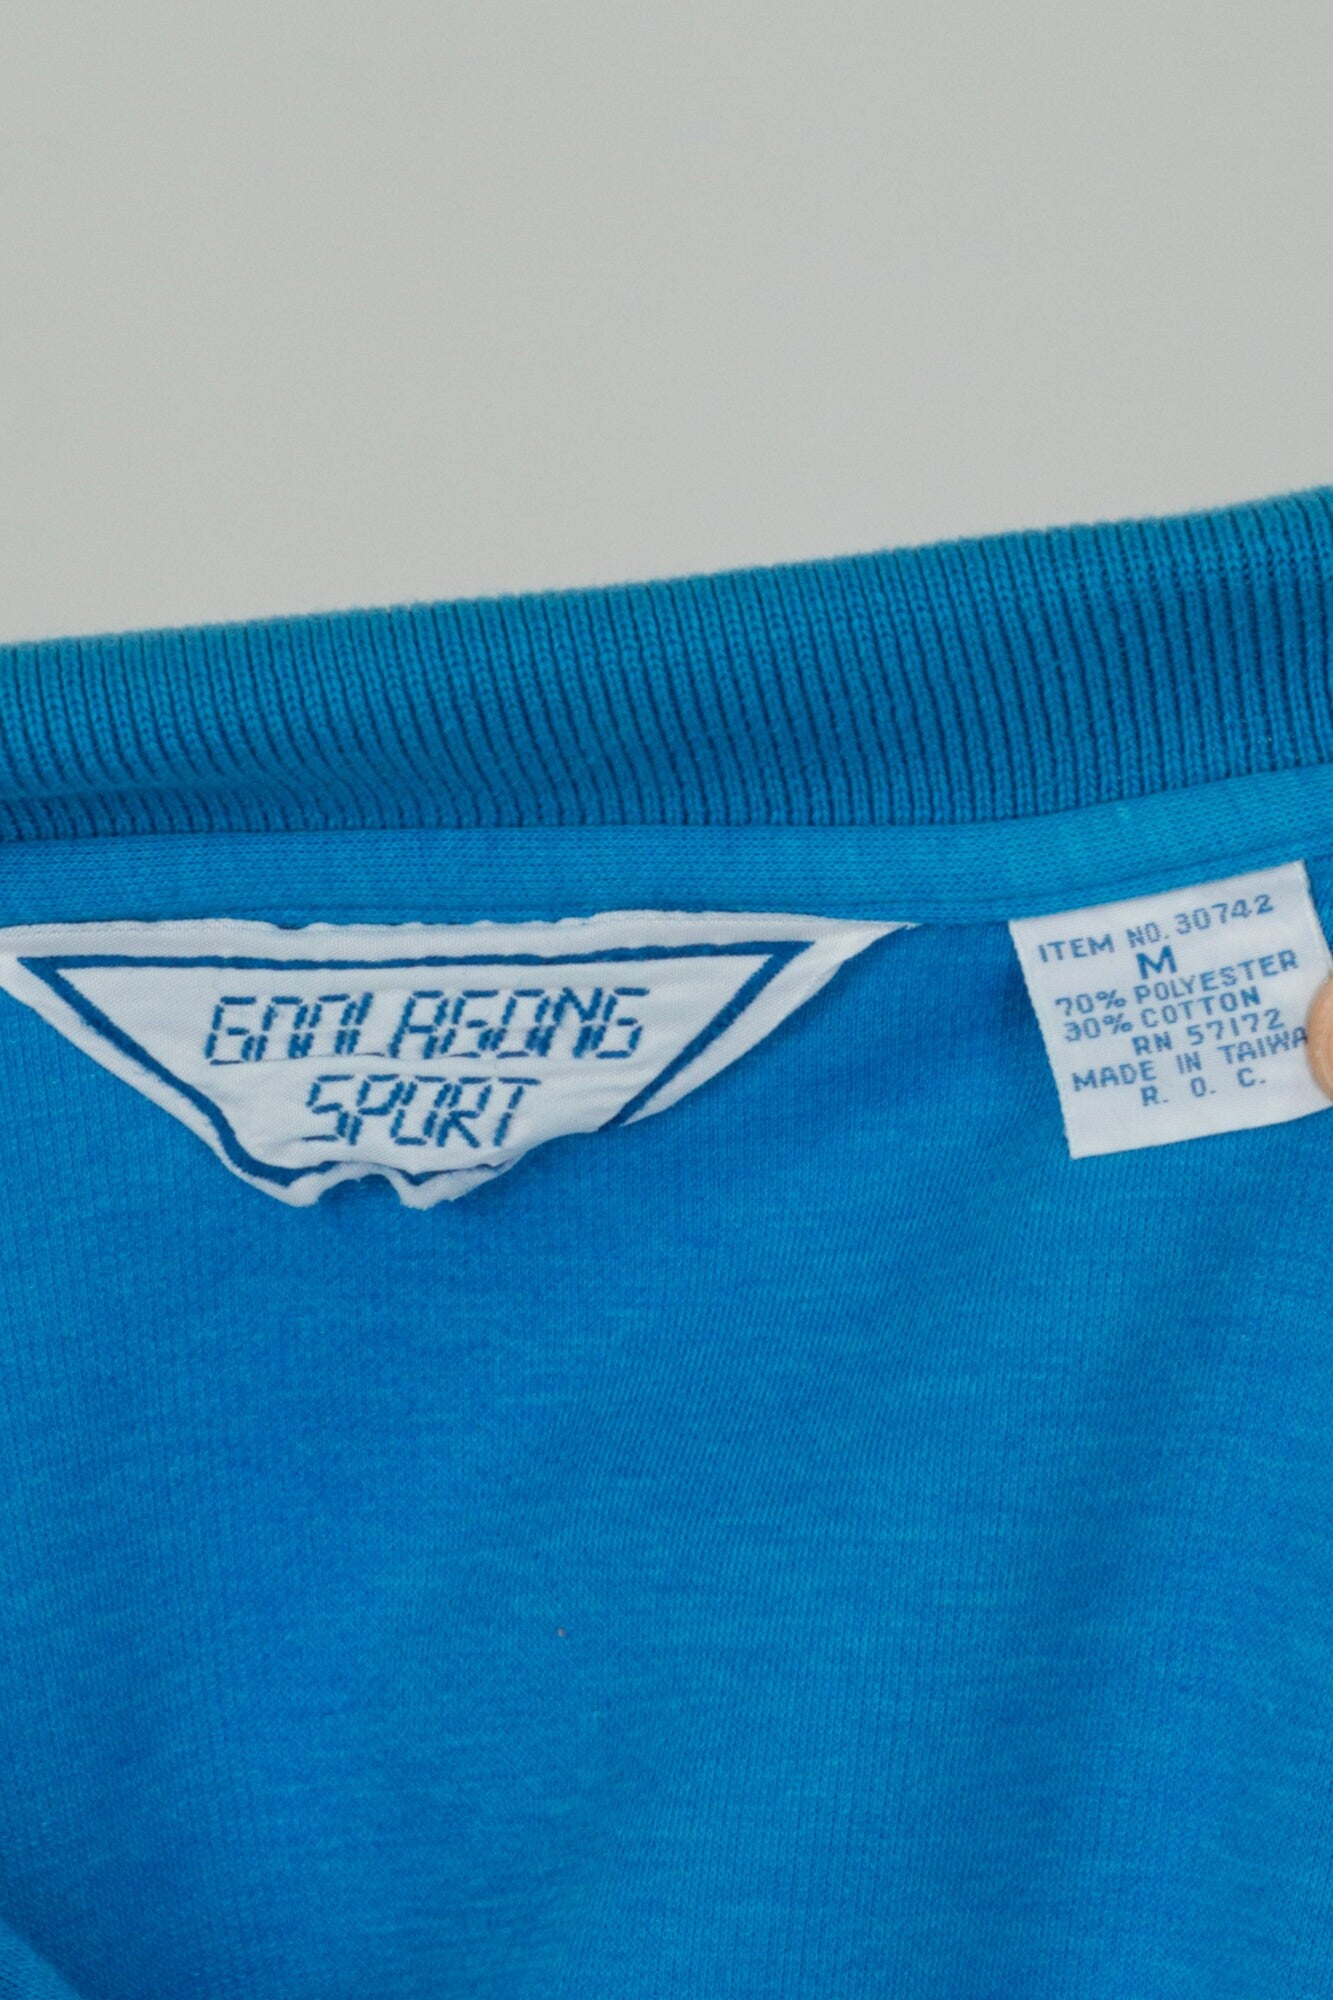 80s Cropped Blue Polo Shirt - Medium to Large 